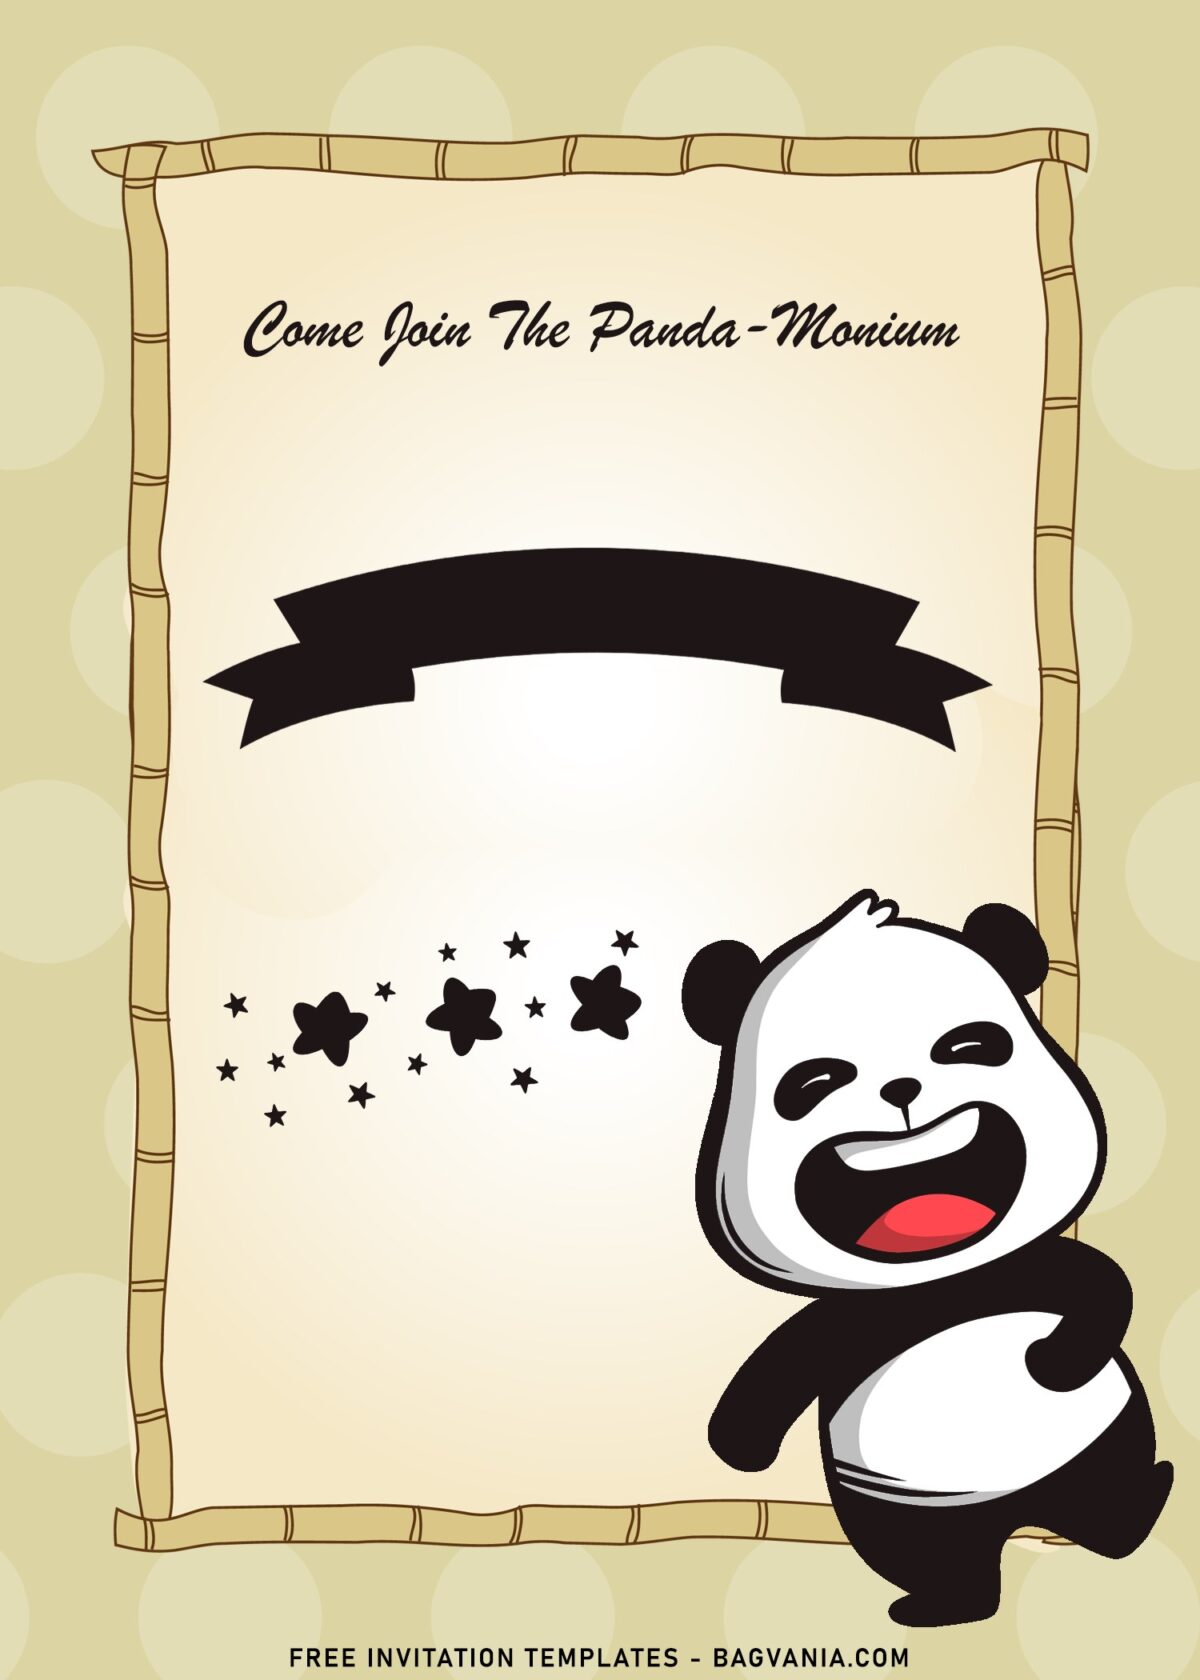 9+ Funny Panda Birthday Invitation Templates For Your Kid's Birthday with laughing baby panda